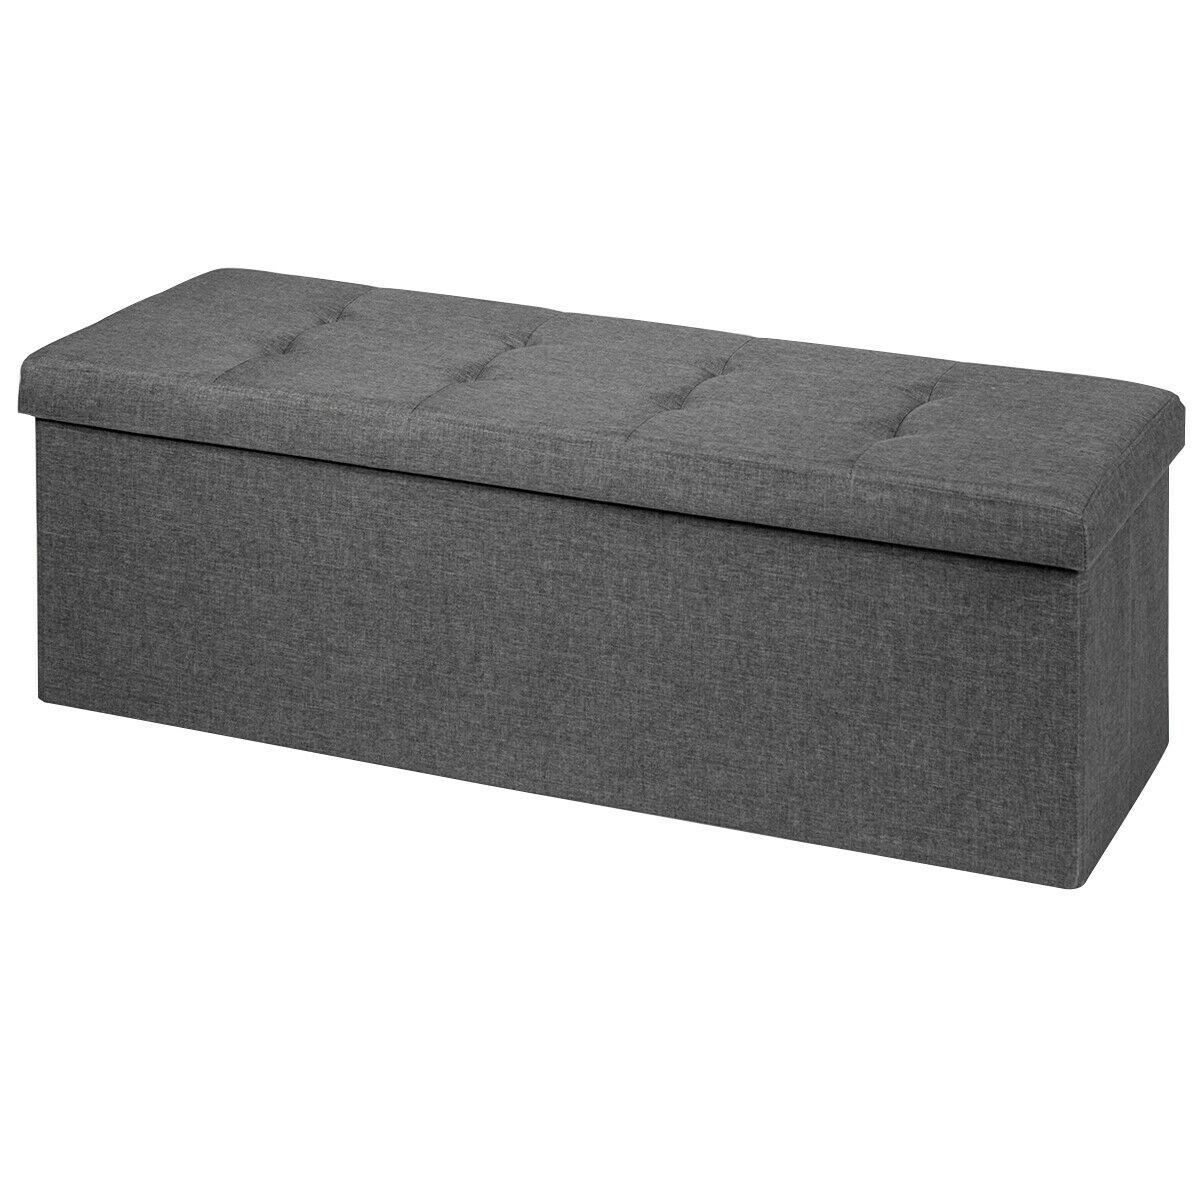 Folding Storage Ottoman Bench with Lid for Hallway or Bedroom - Grey